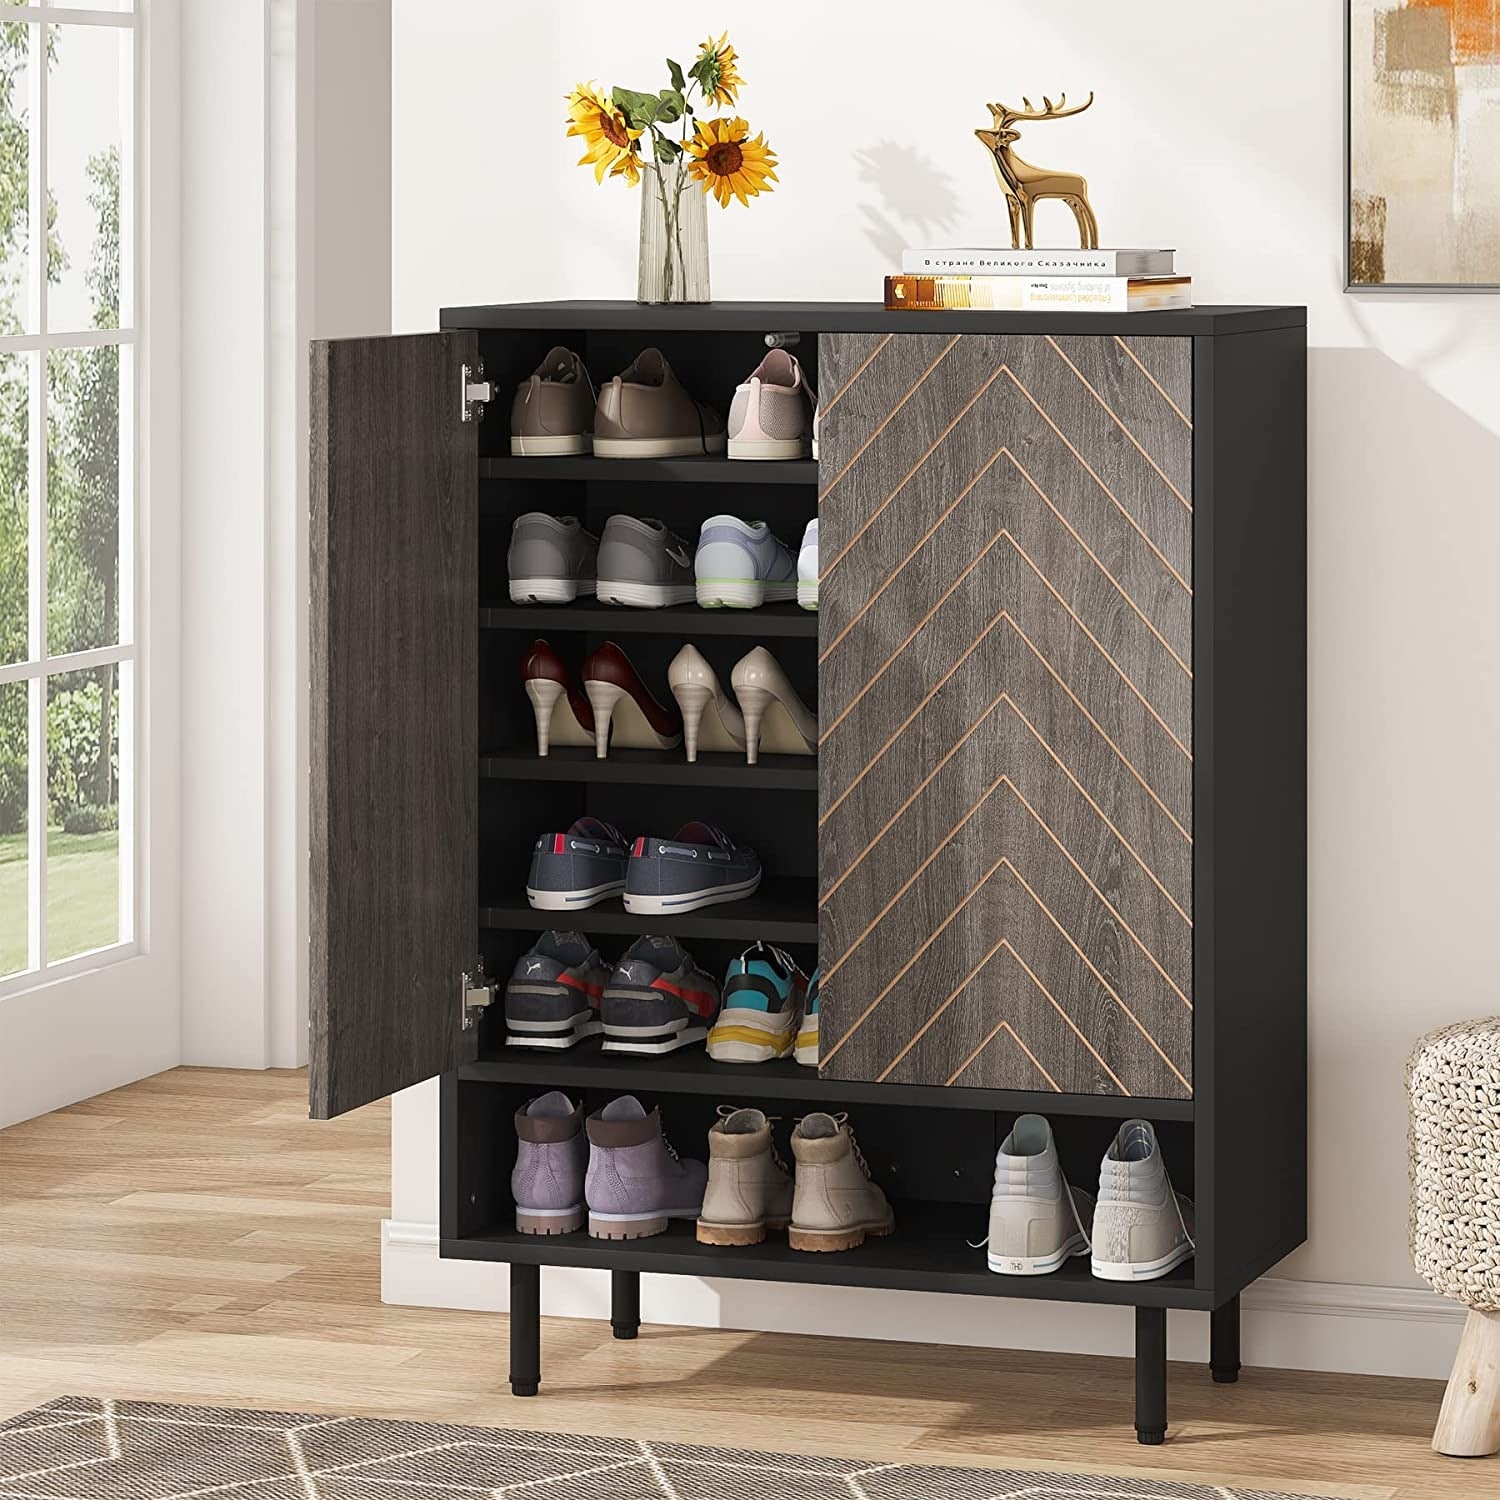 https://ak1.ostkcdn.com/images/products/is/images/direct/c7f55b15d1011022c612926a5fa209a214aa3120/Entryway-Shoe-Storage-Cabinet-Shoe-Rack-Organizer-Cabinet-with-Door.jpg